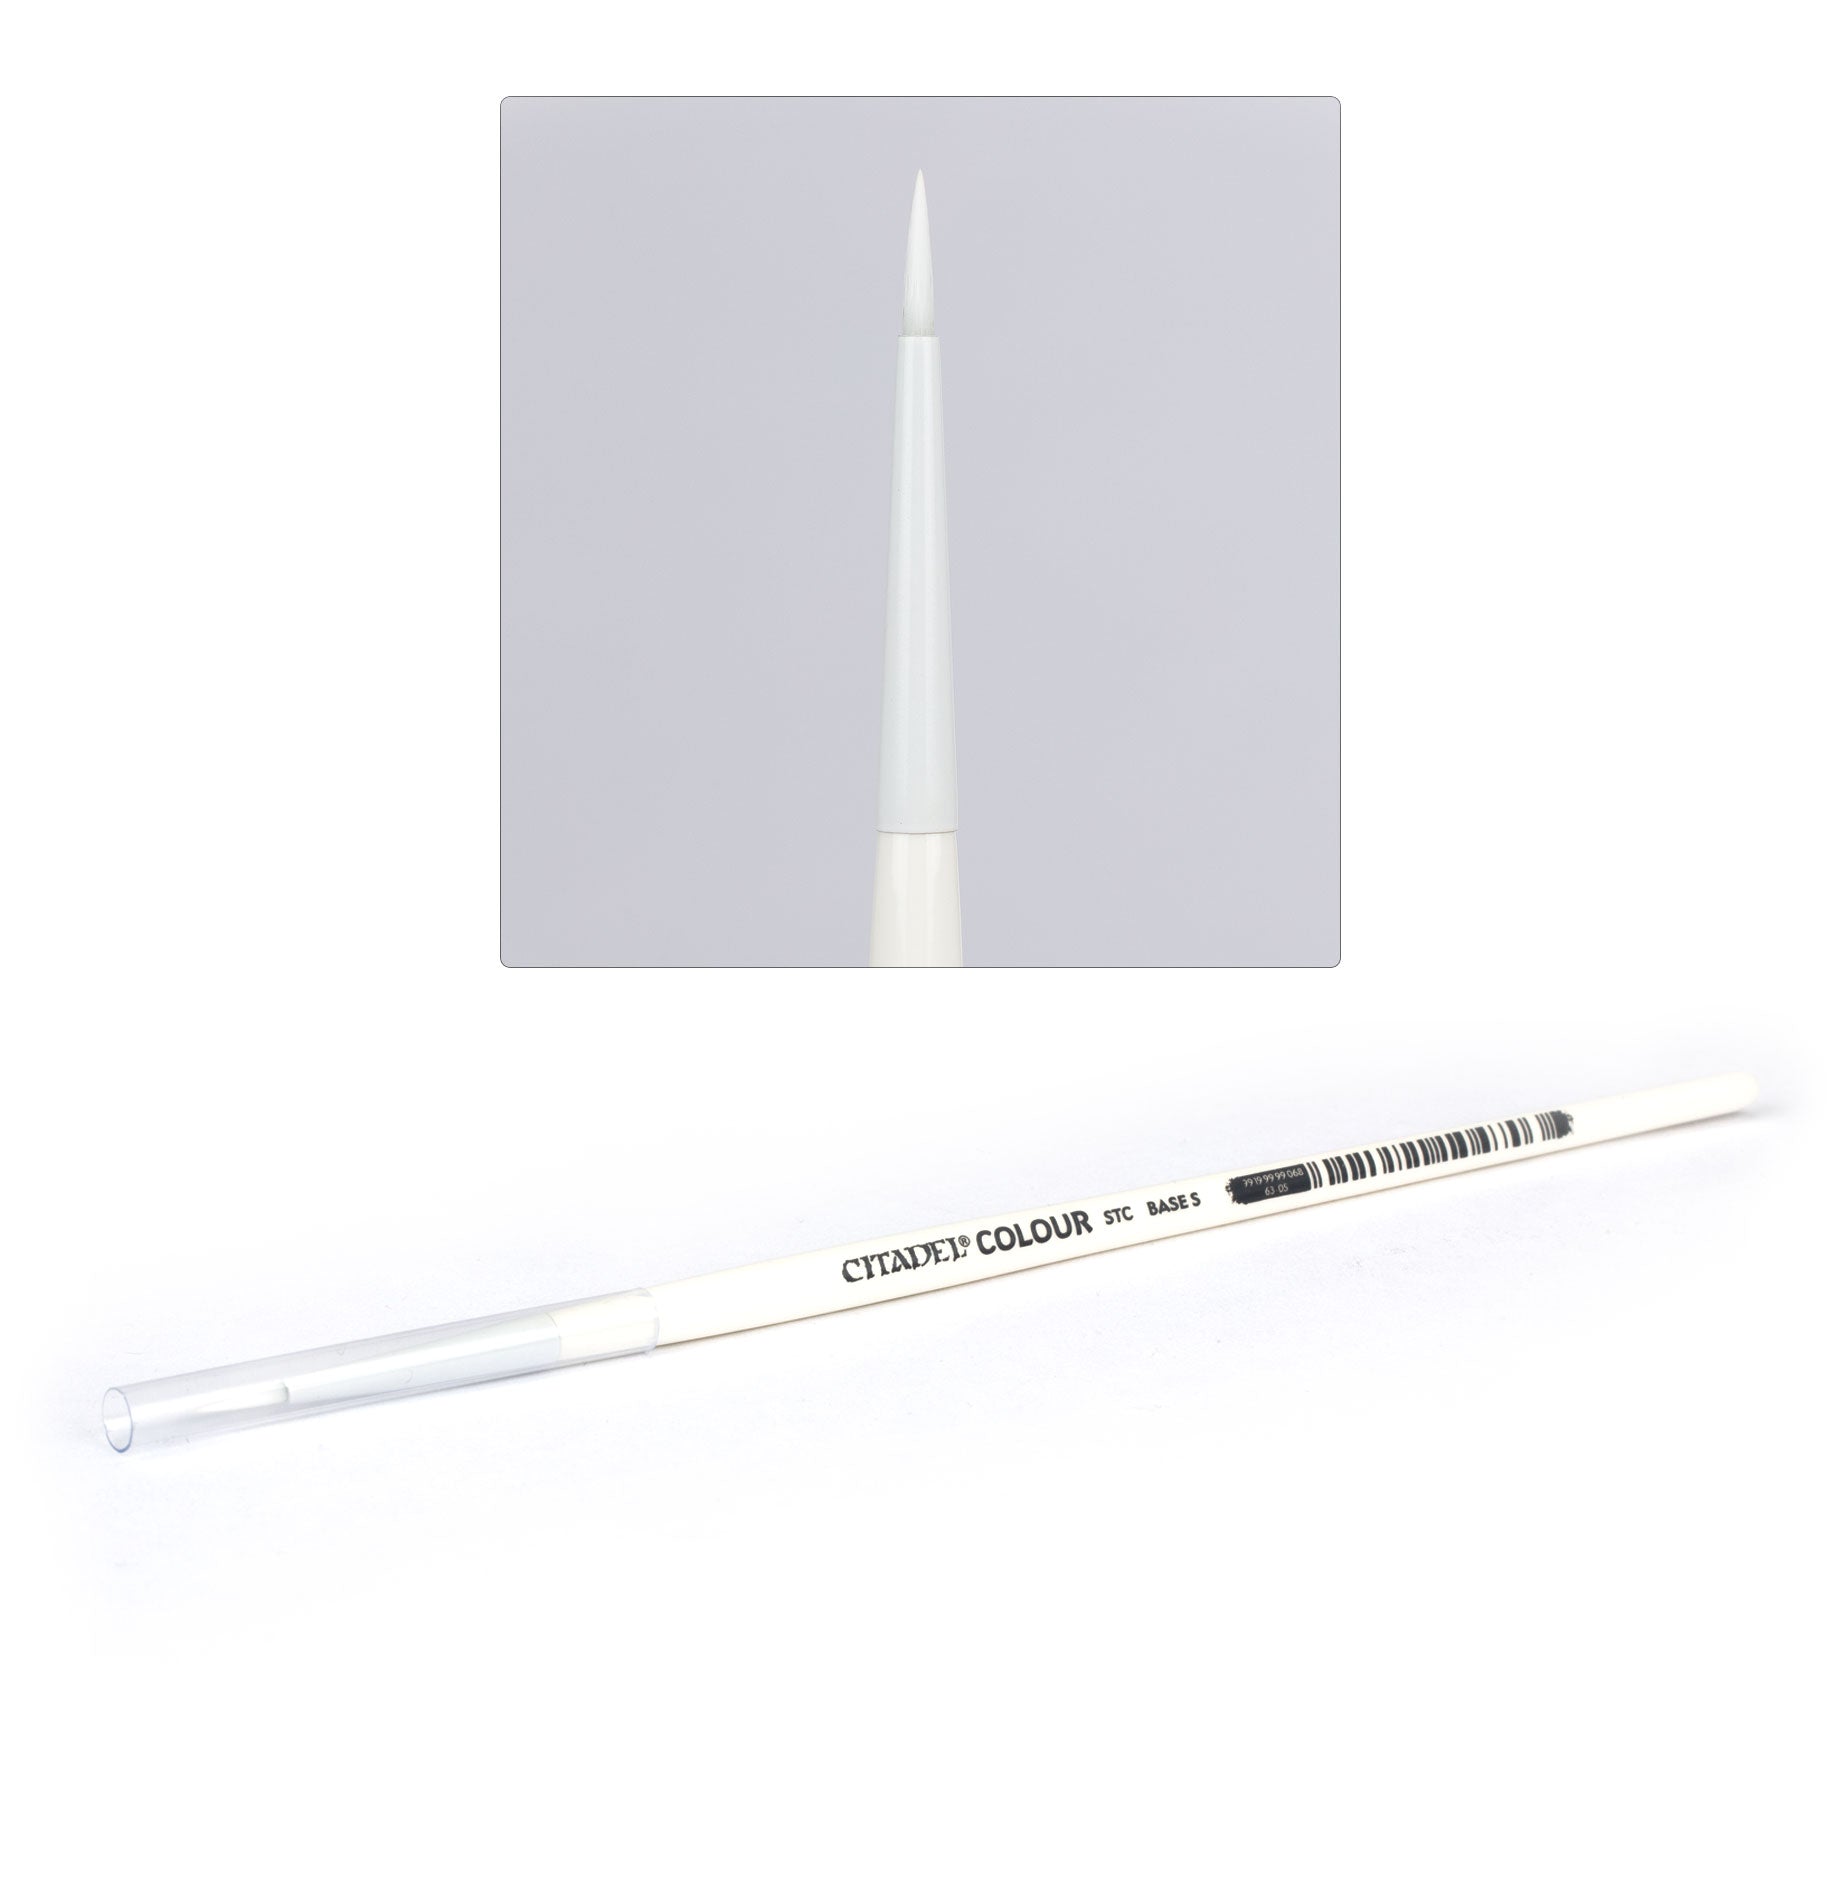 SYNTHETIC Base Brush (Small) - phase out